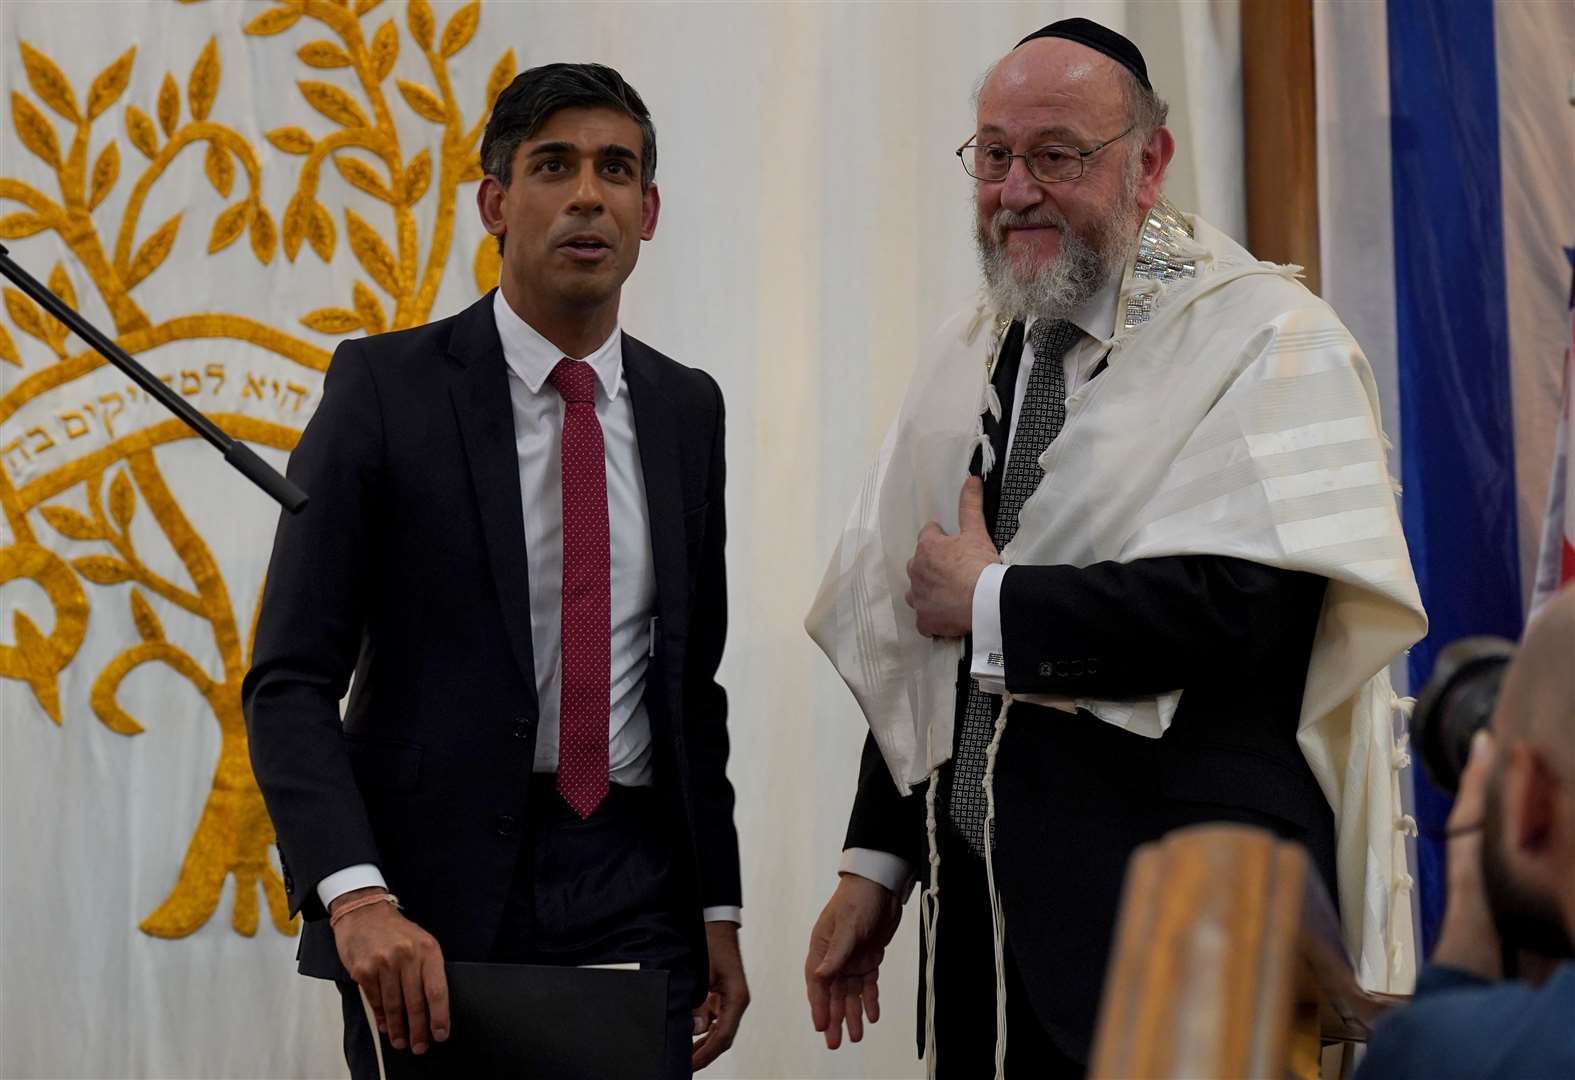 Rishi Sunak and Chief Rabbi Sir Ephraim Mirvis attending Finchley United Synagogue in central London, for victims and hostages of the Hamas attacks, on Monday (Lucy North/PA)